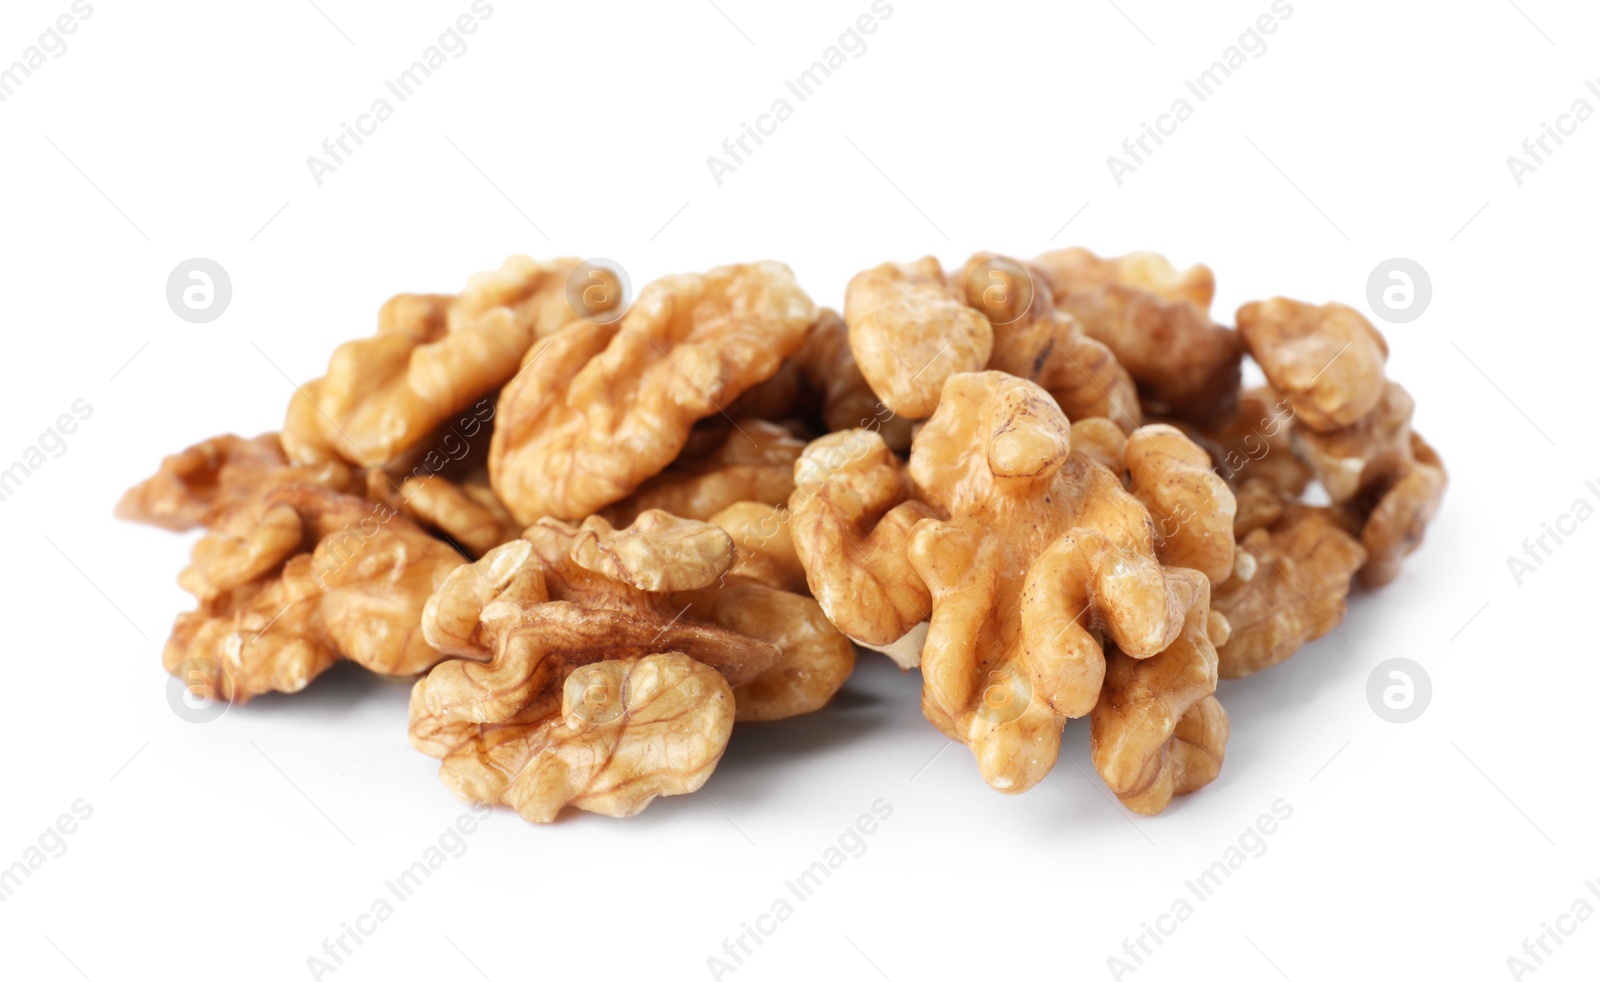 Photo of Heap of tasty walnuts on white background